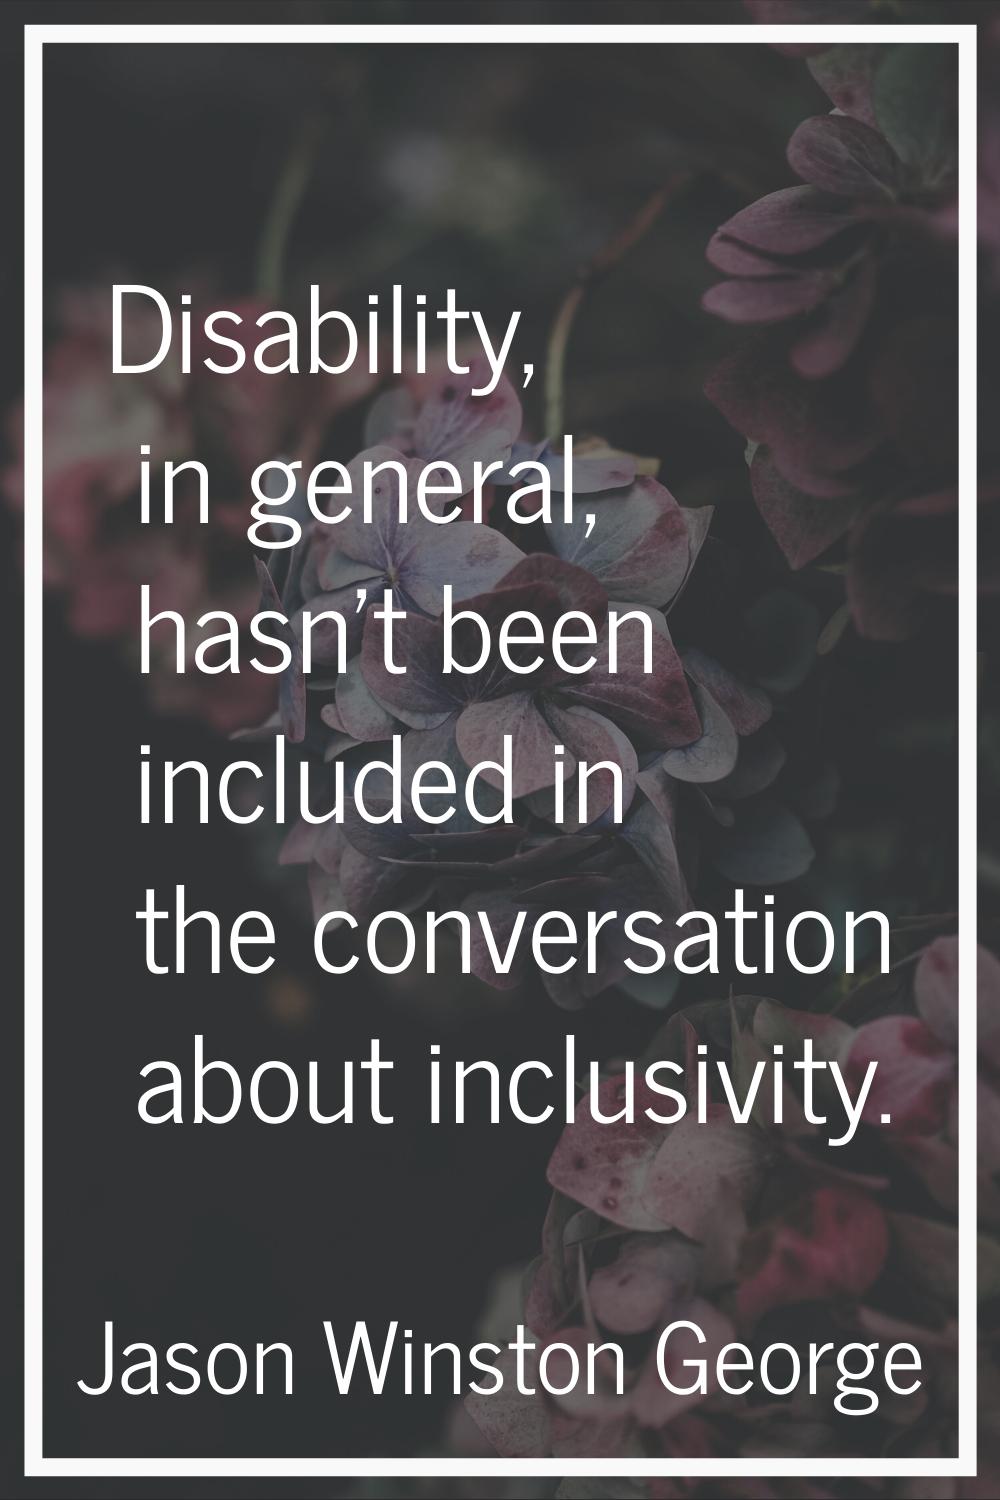 Disability, in general, hasn't been included in the conversation about inclusivity.